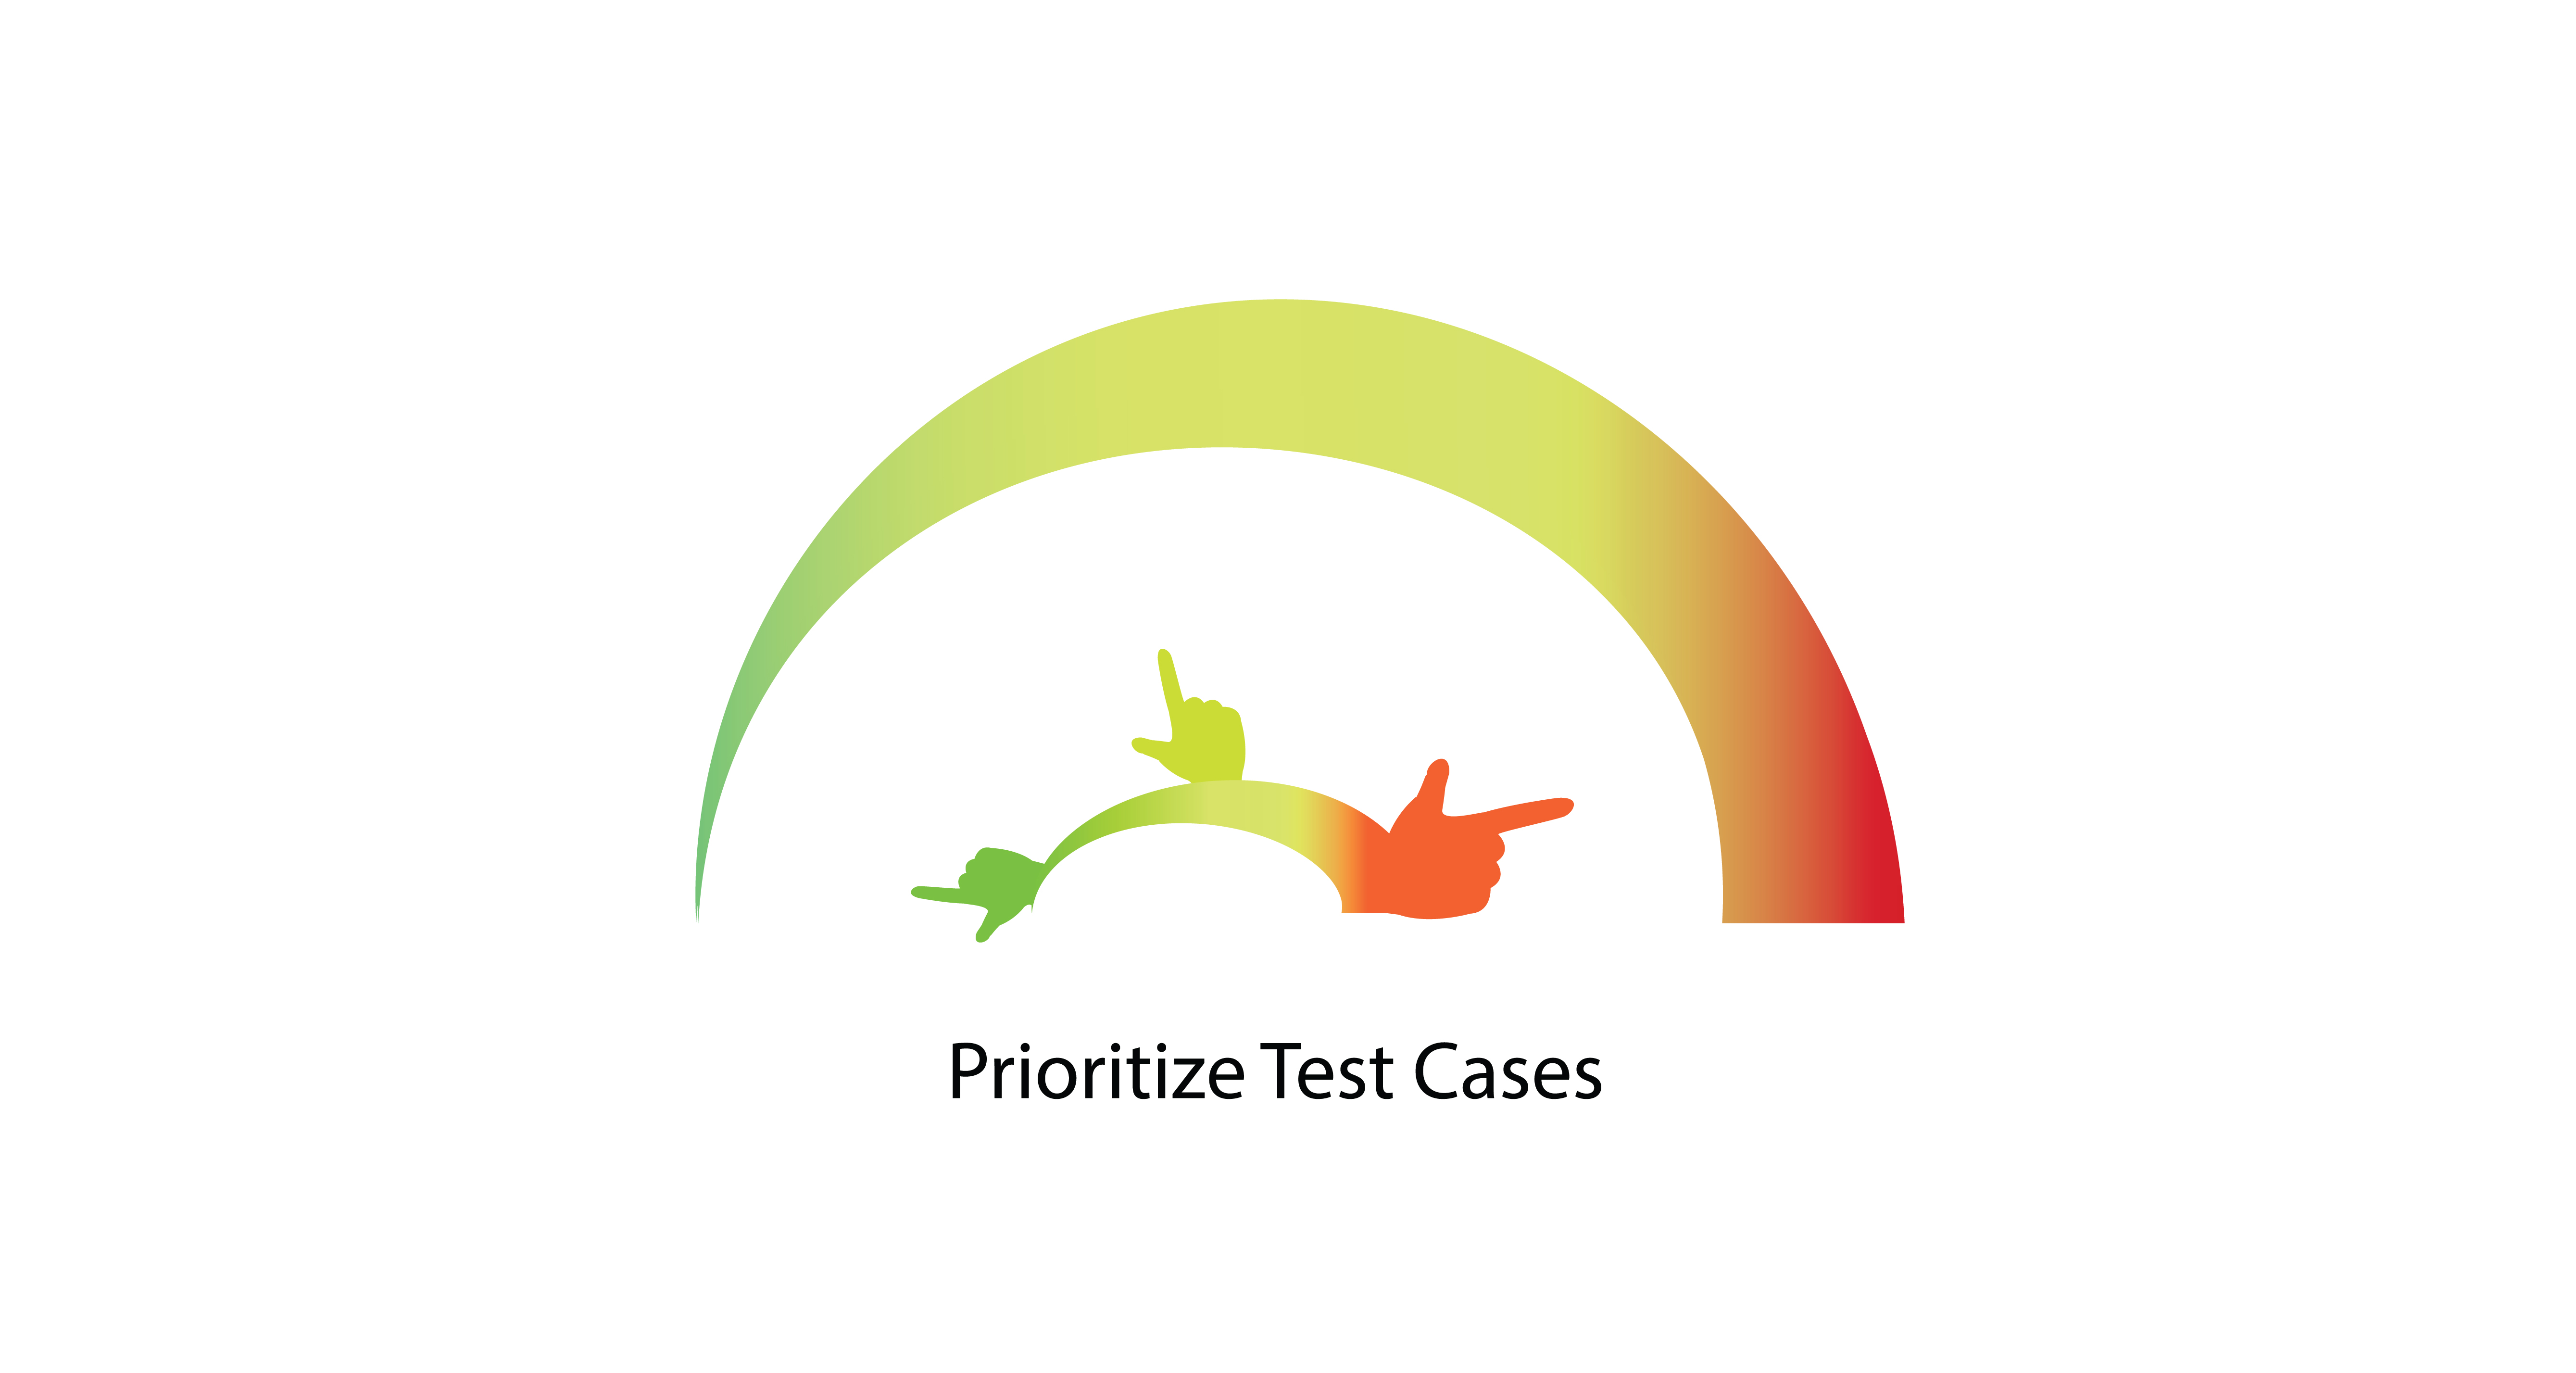 How to prioritize test cases for regression testing?